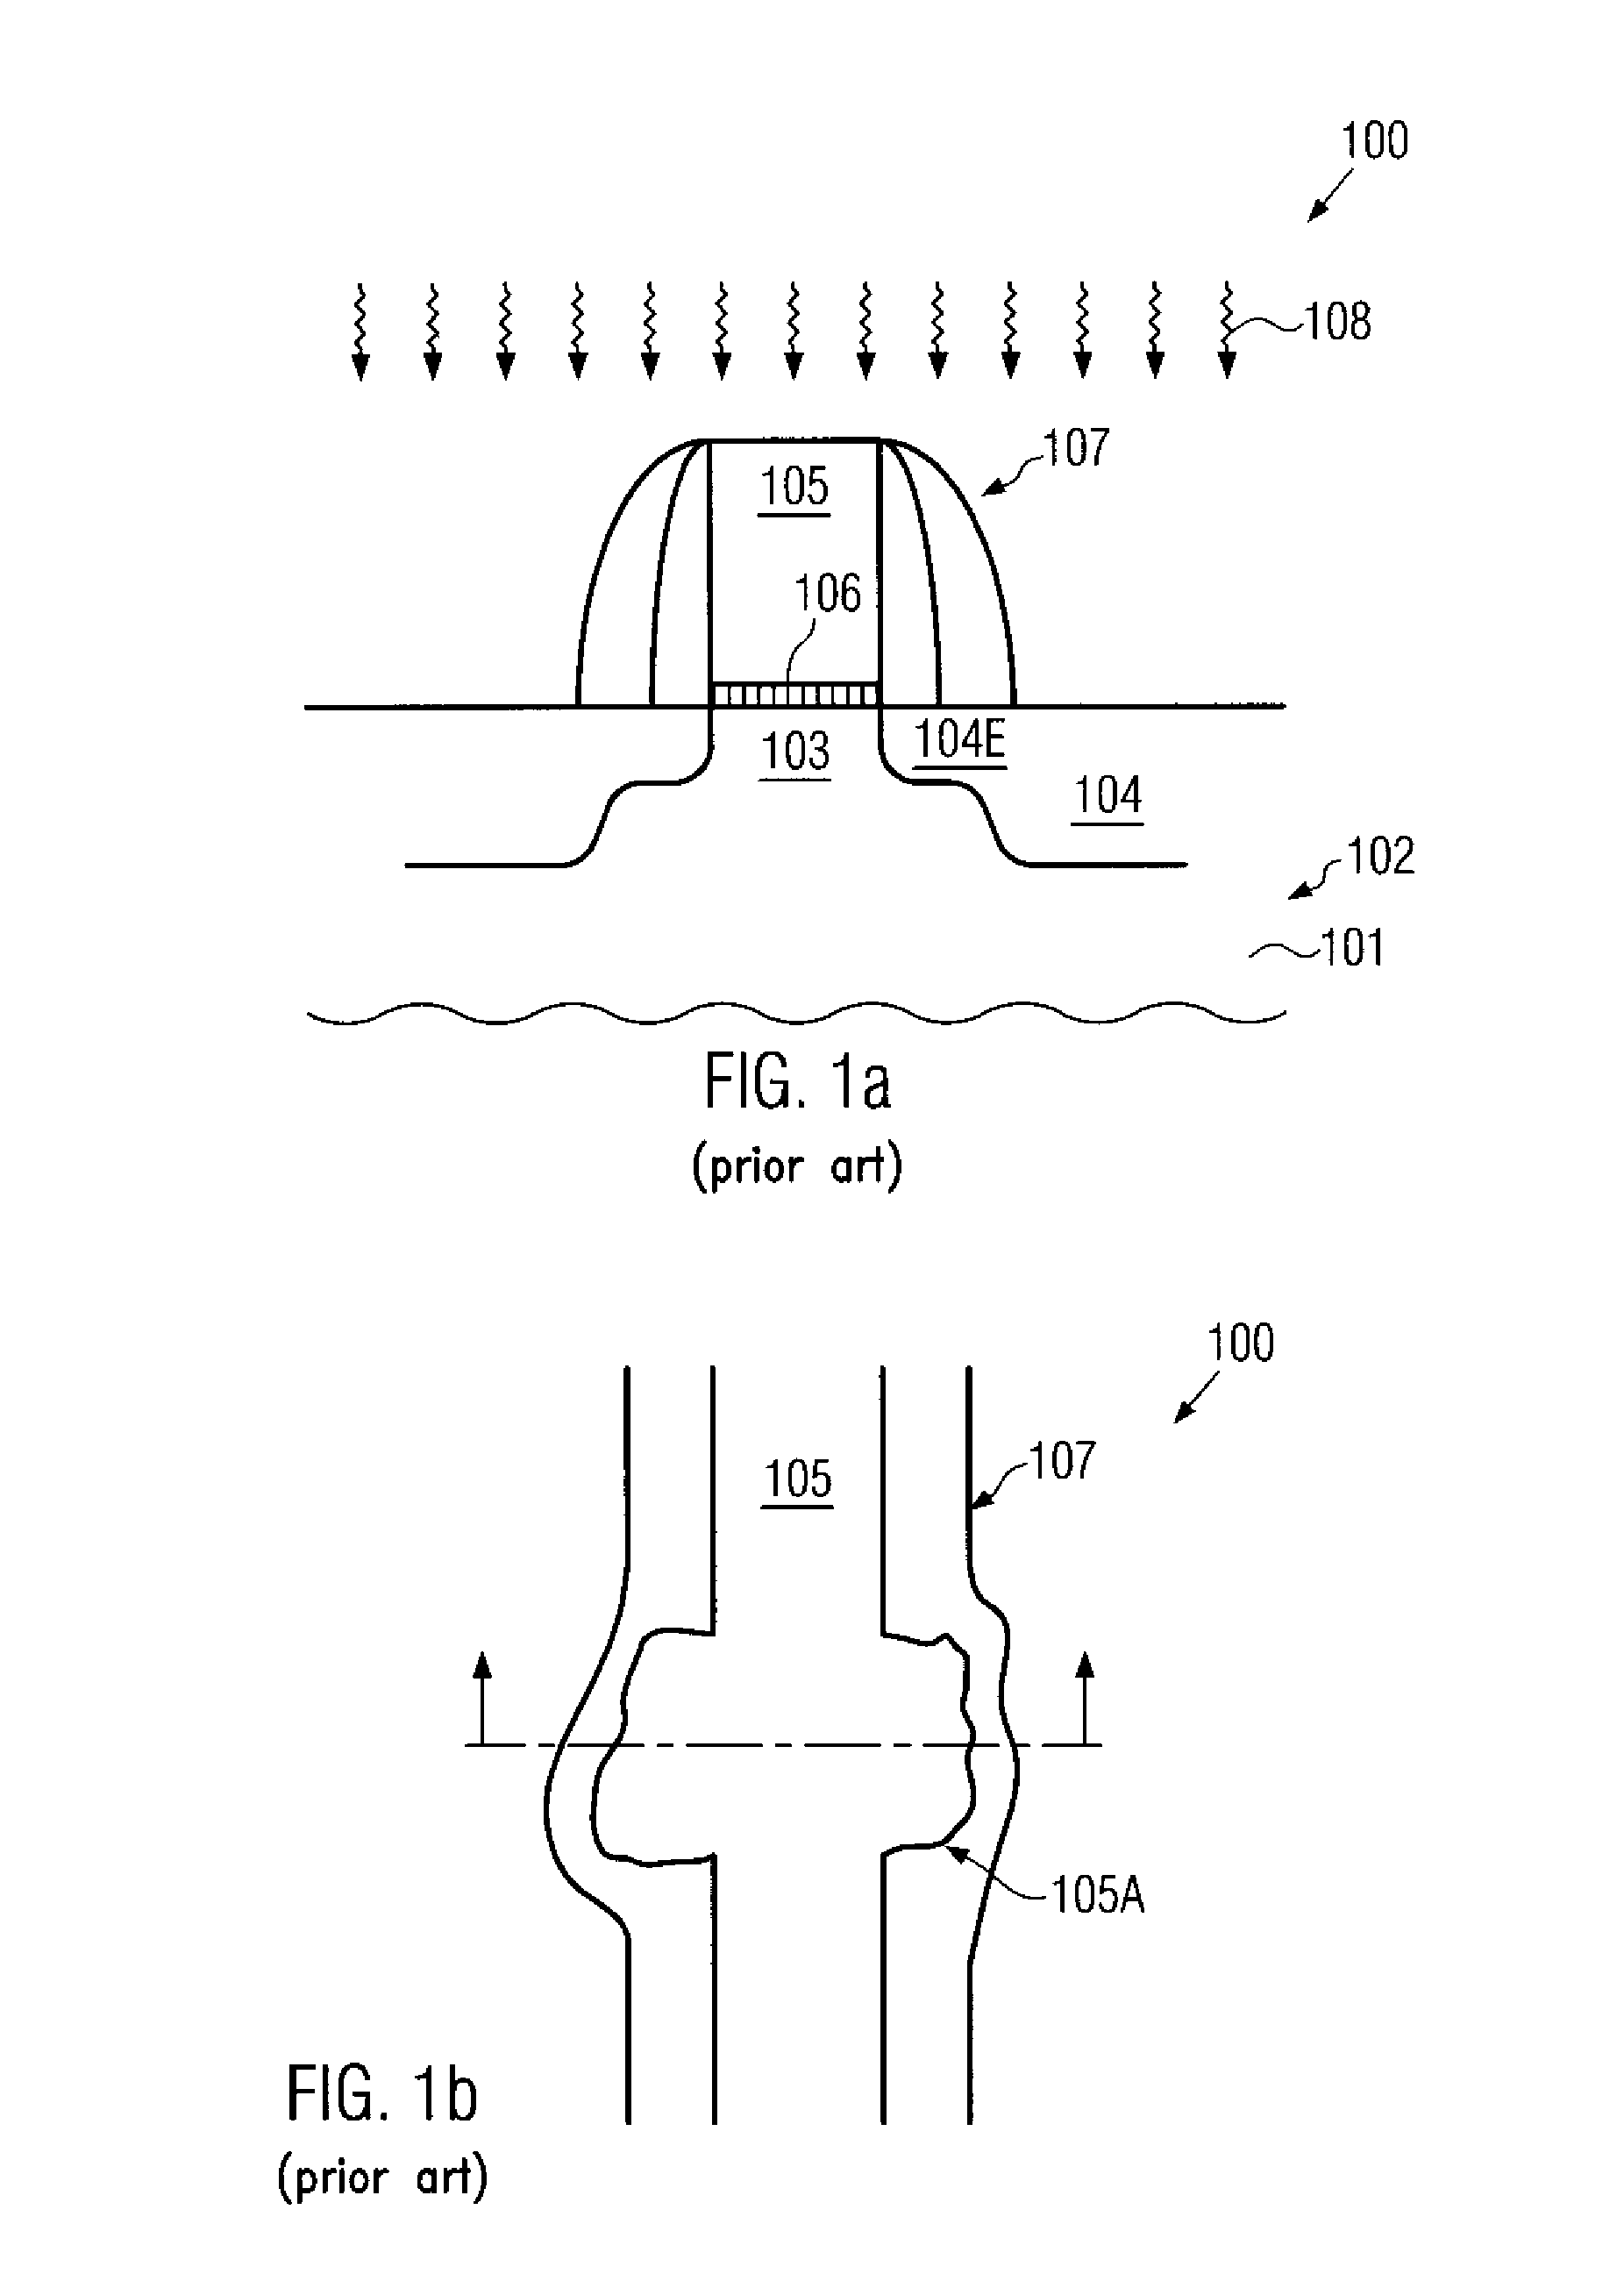 Technique for enhancing dopant activation by using multiple sequential advanced laser/flash anneal processes